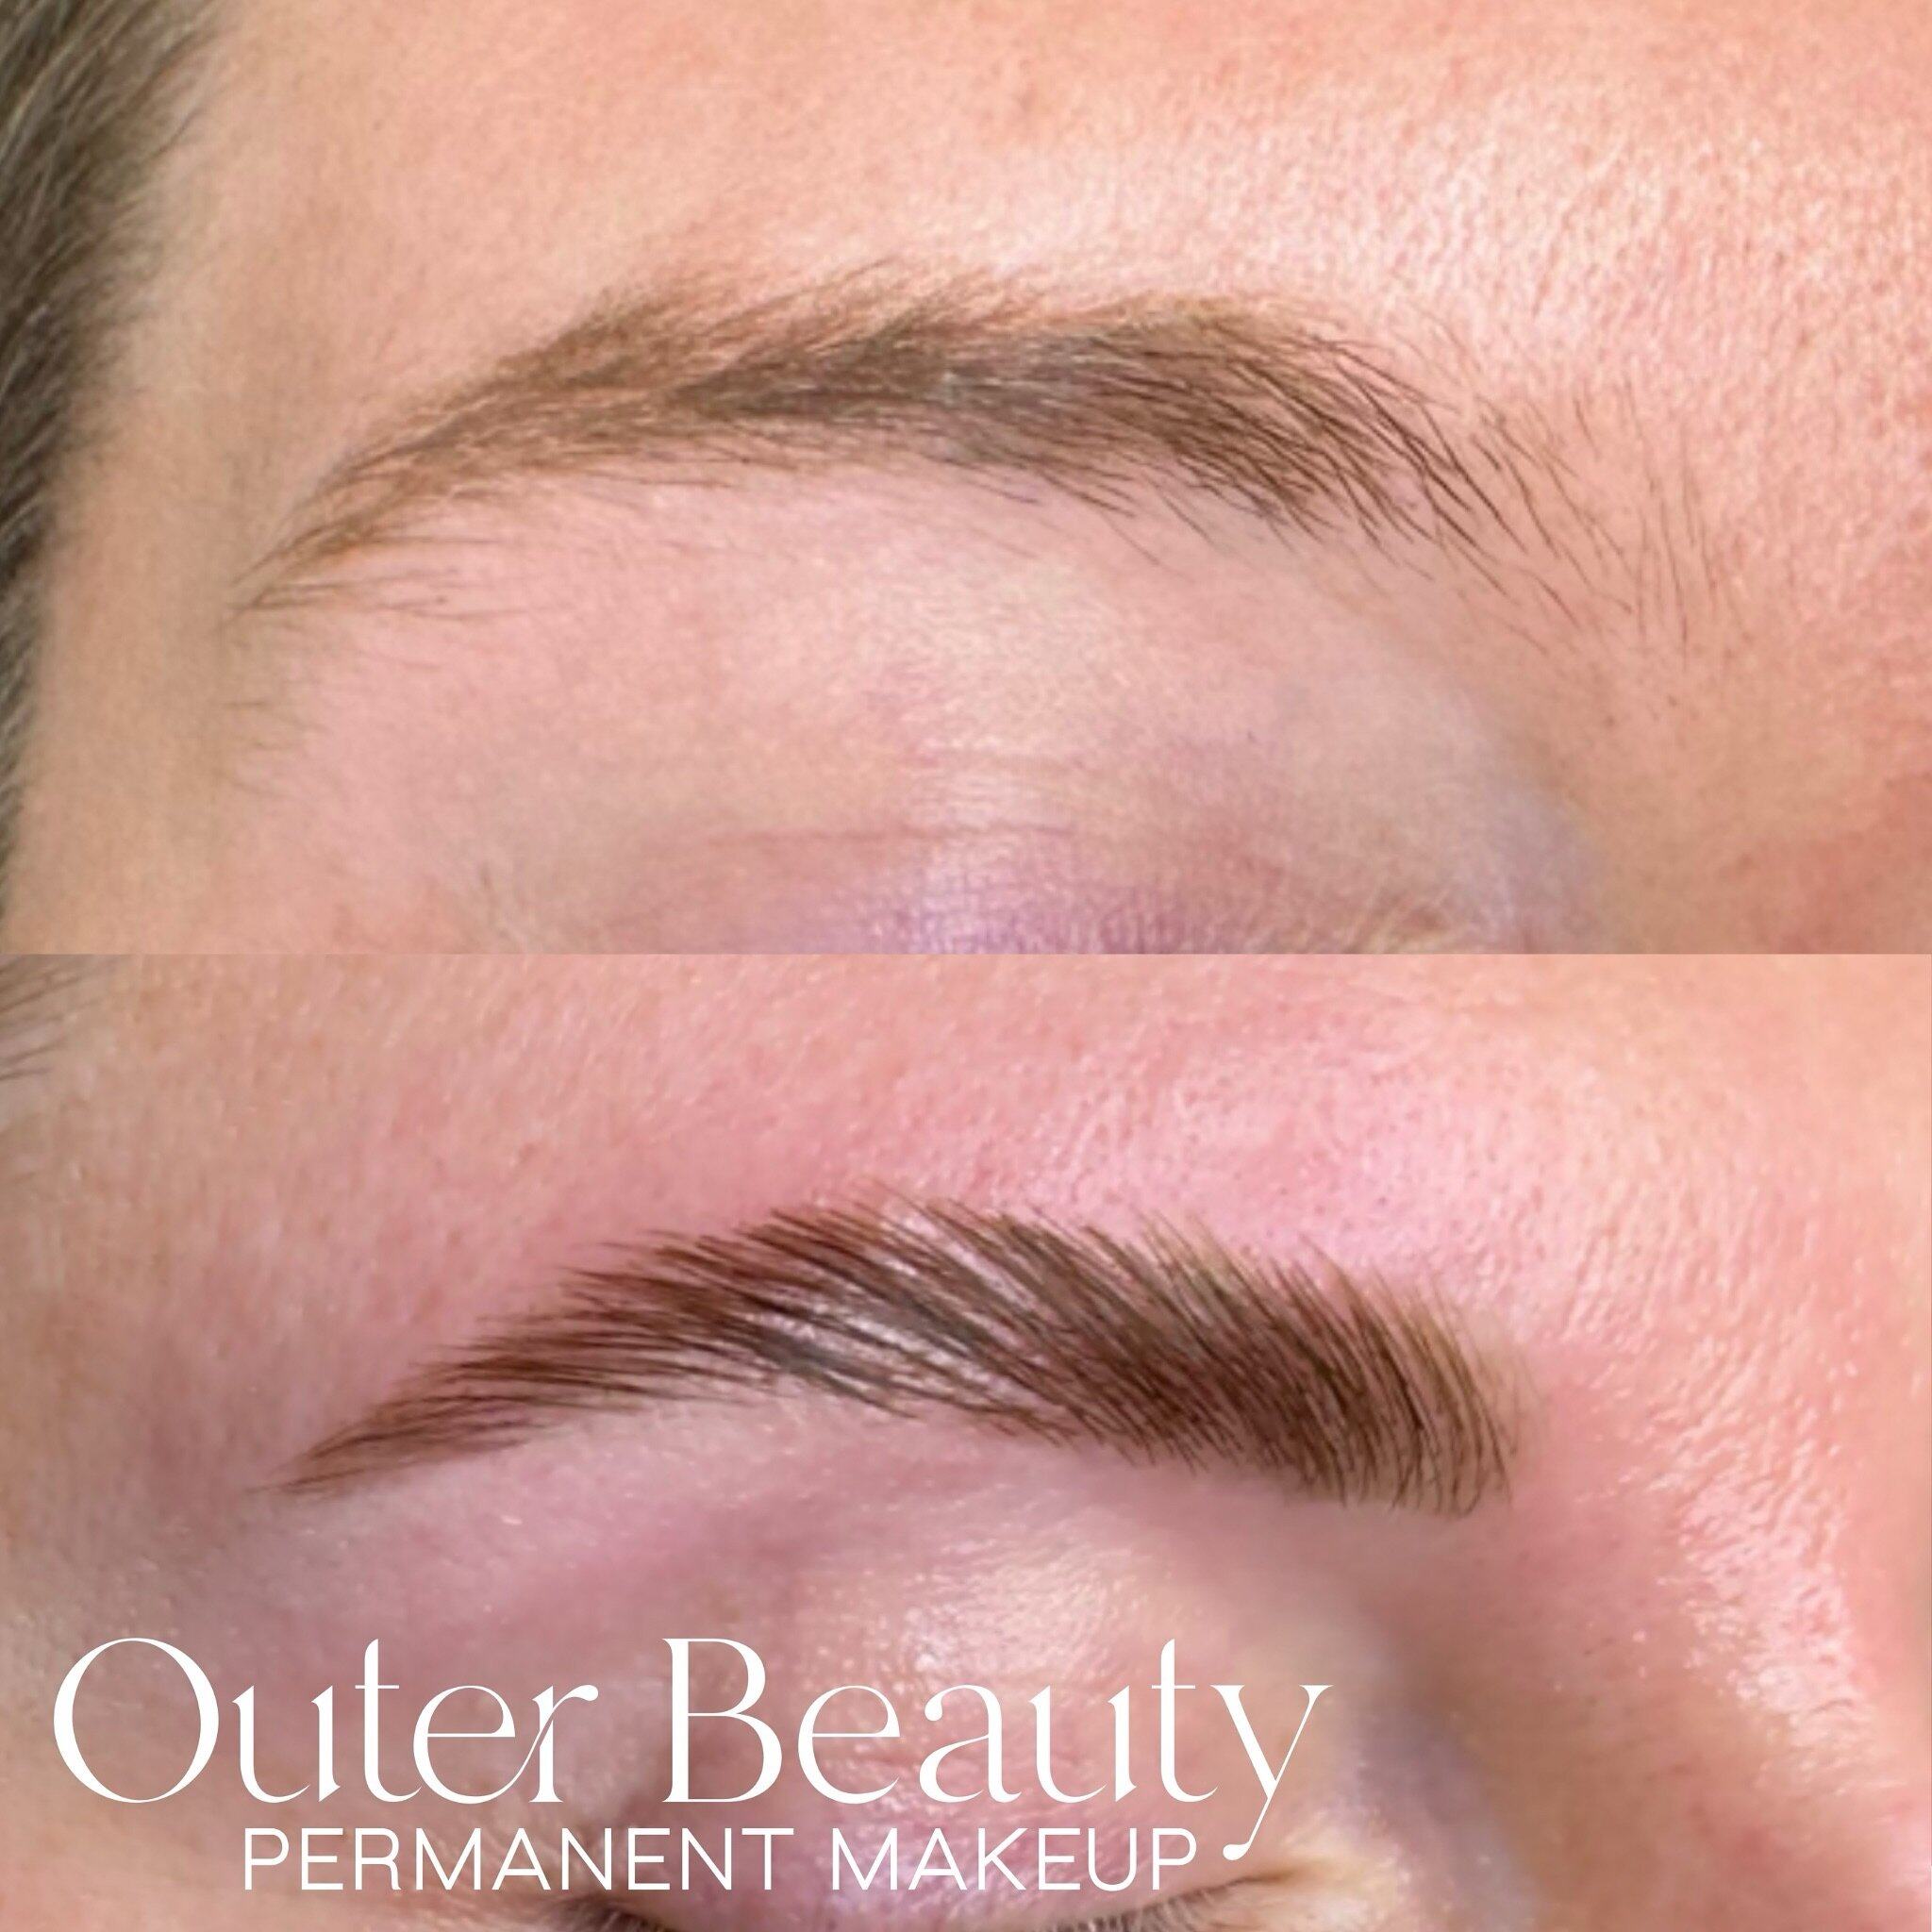 We love lamination 😍😍 not ready to commit to permanent makeup or want something to add on top? Wax, tint, and lamination is the perfect combination! This service gives you the appearance of fuller, fluffier brows and can help make them more symmetr